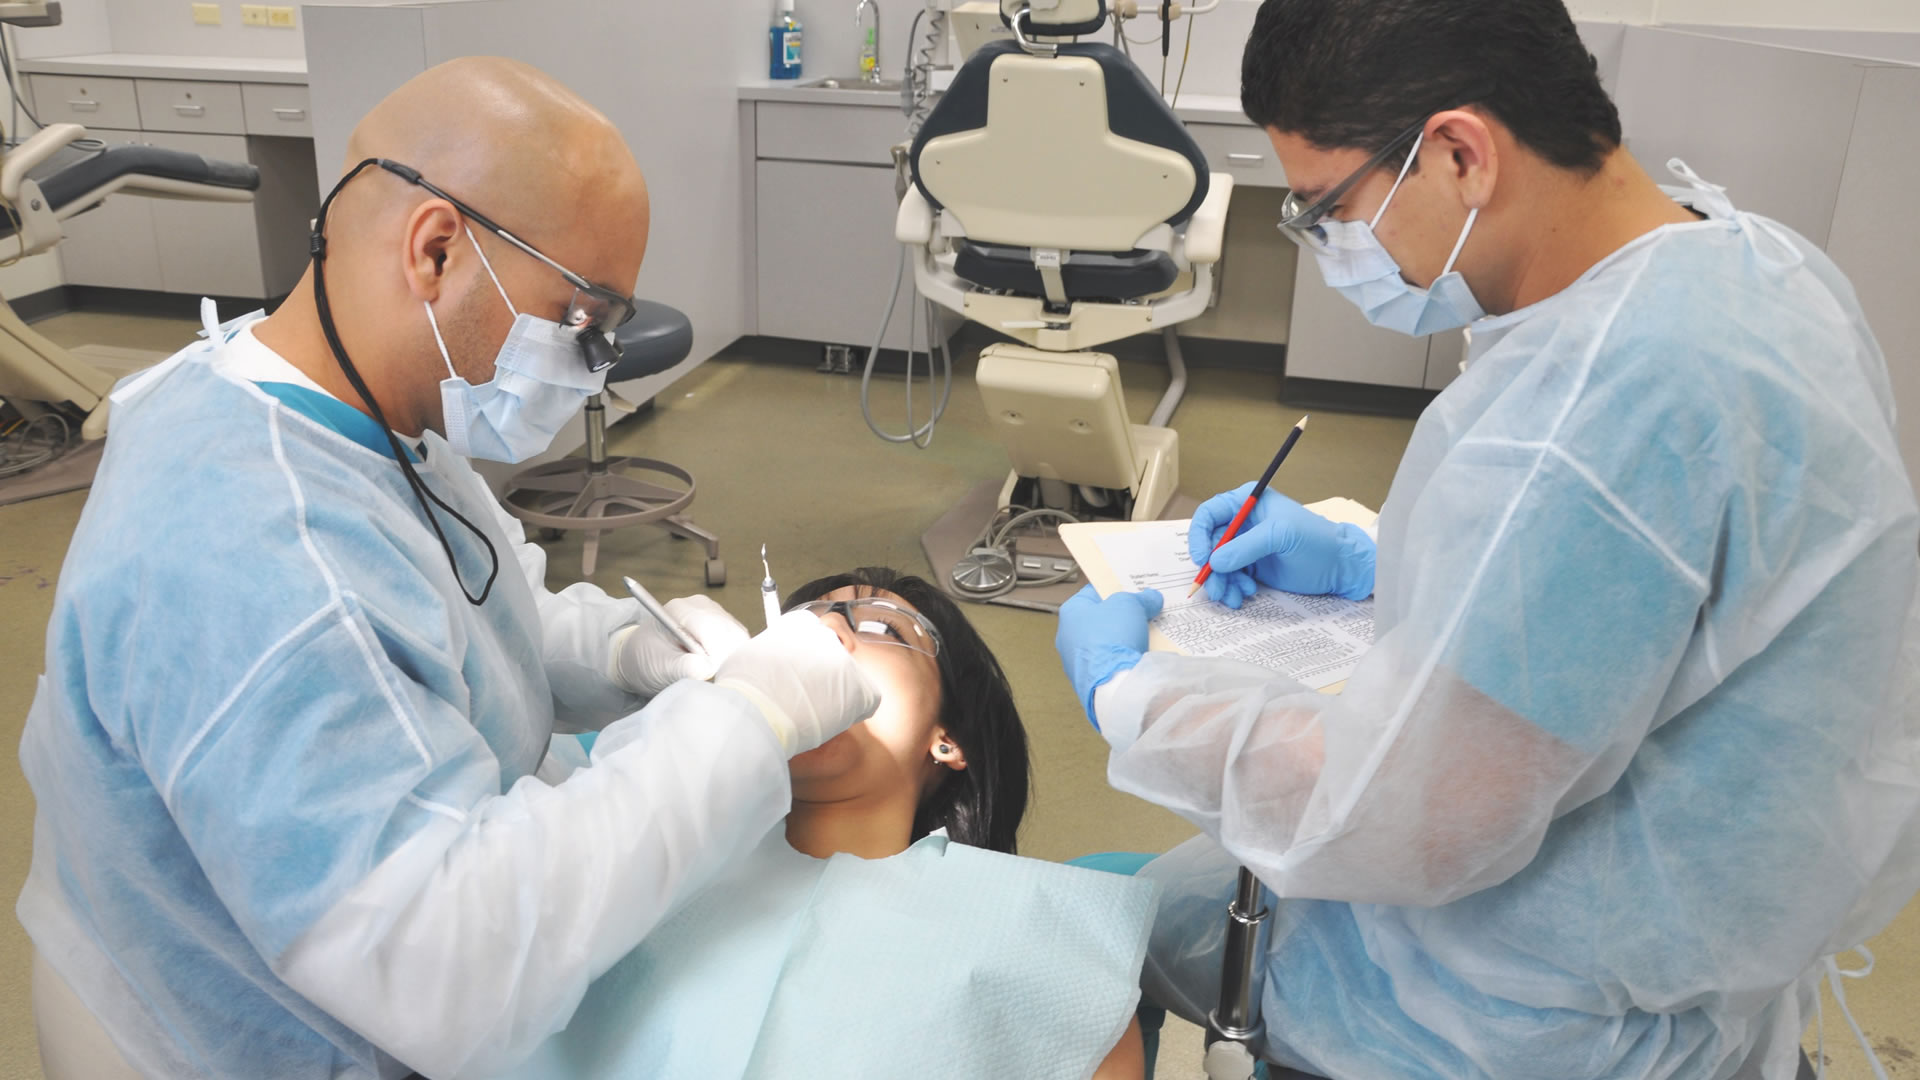 A student observes a dental hygienist working with a live patient 